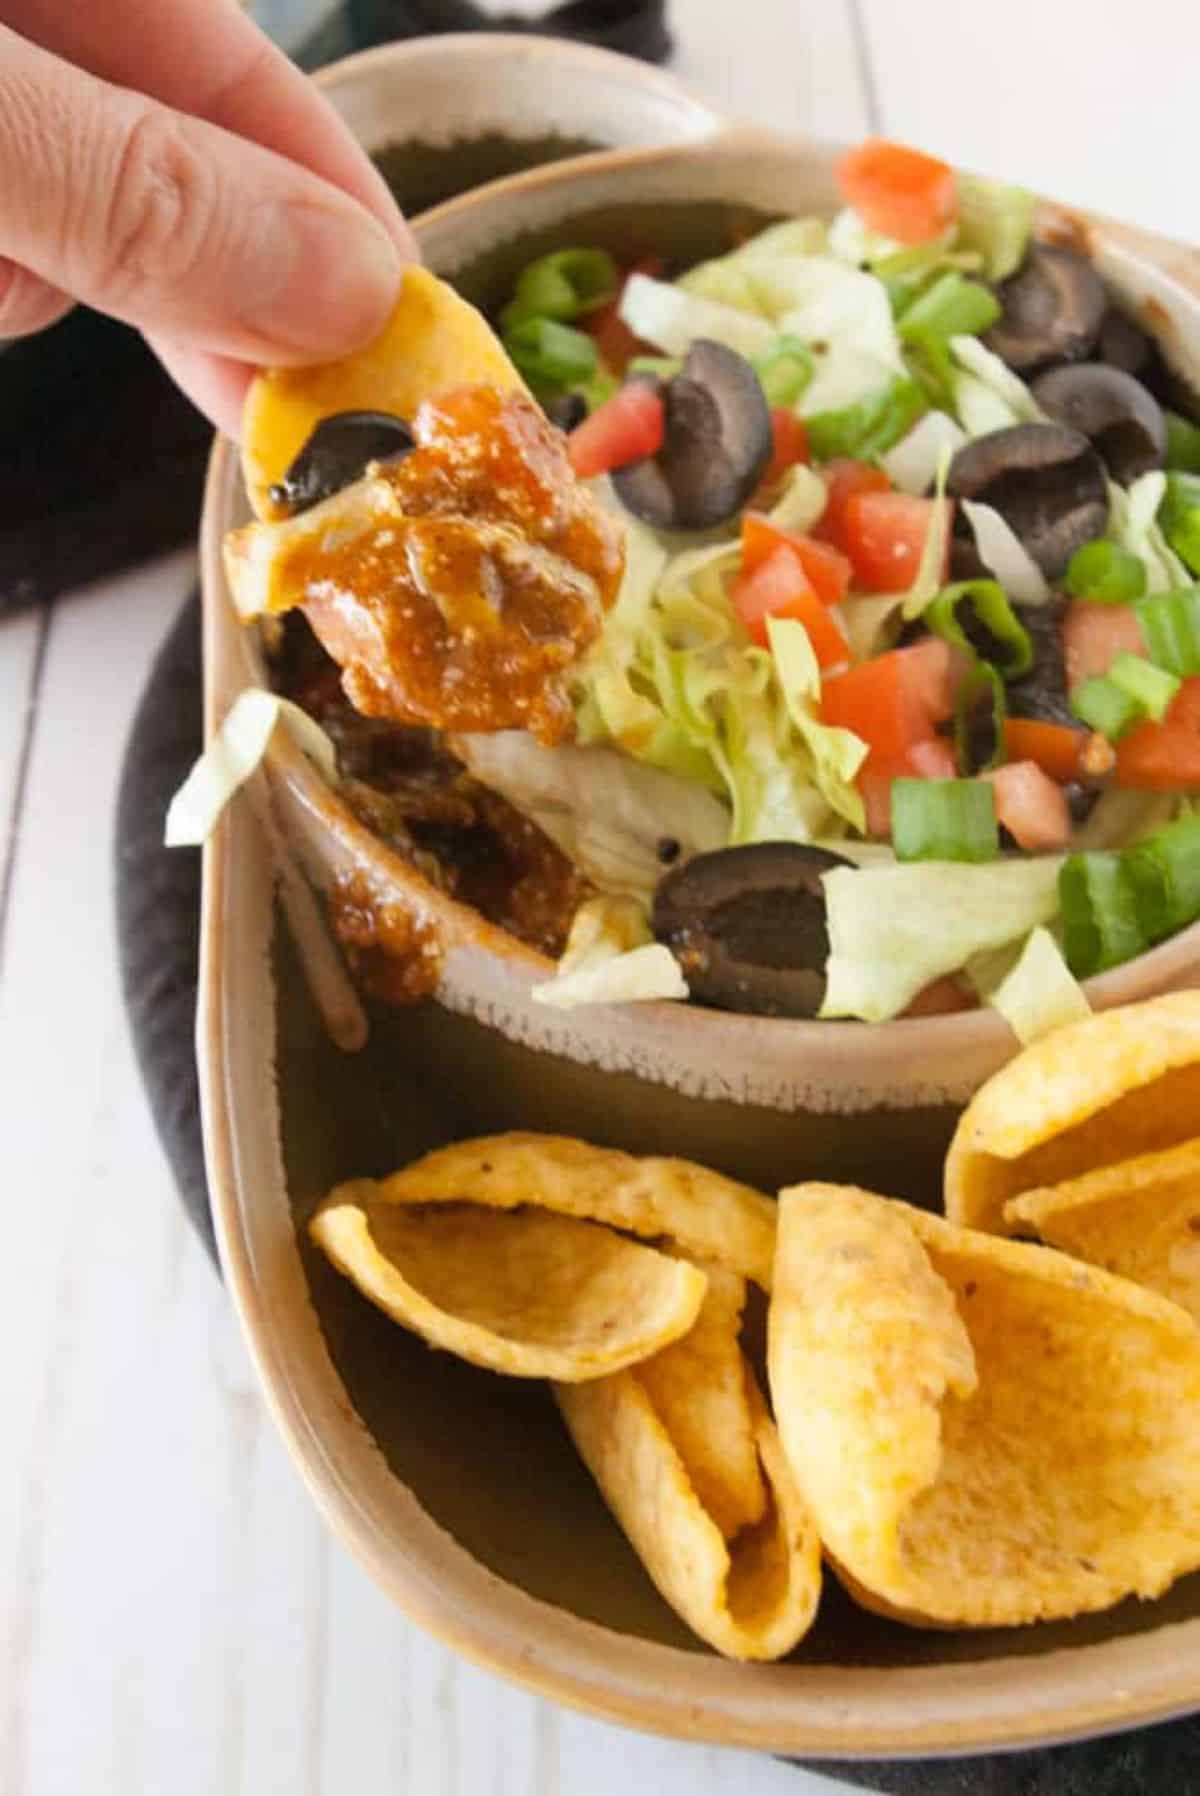 A chip dipped in a delicious Hot Taco Chili Dip held by hand.